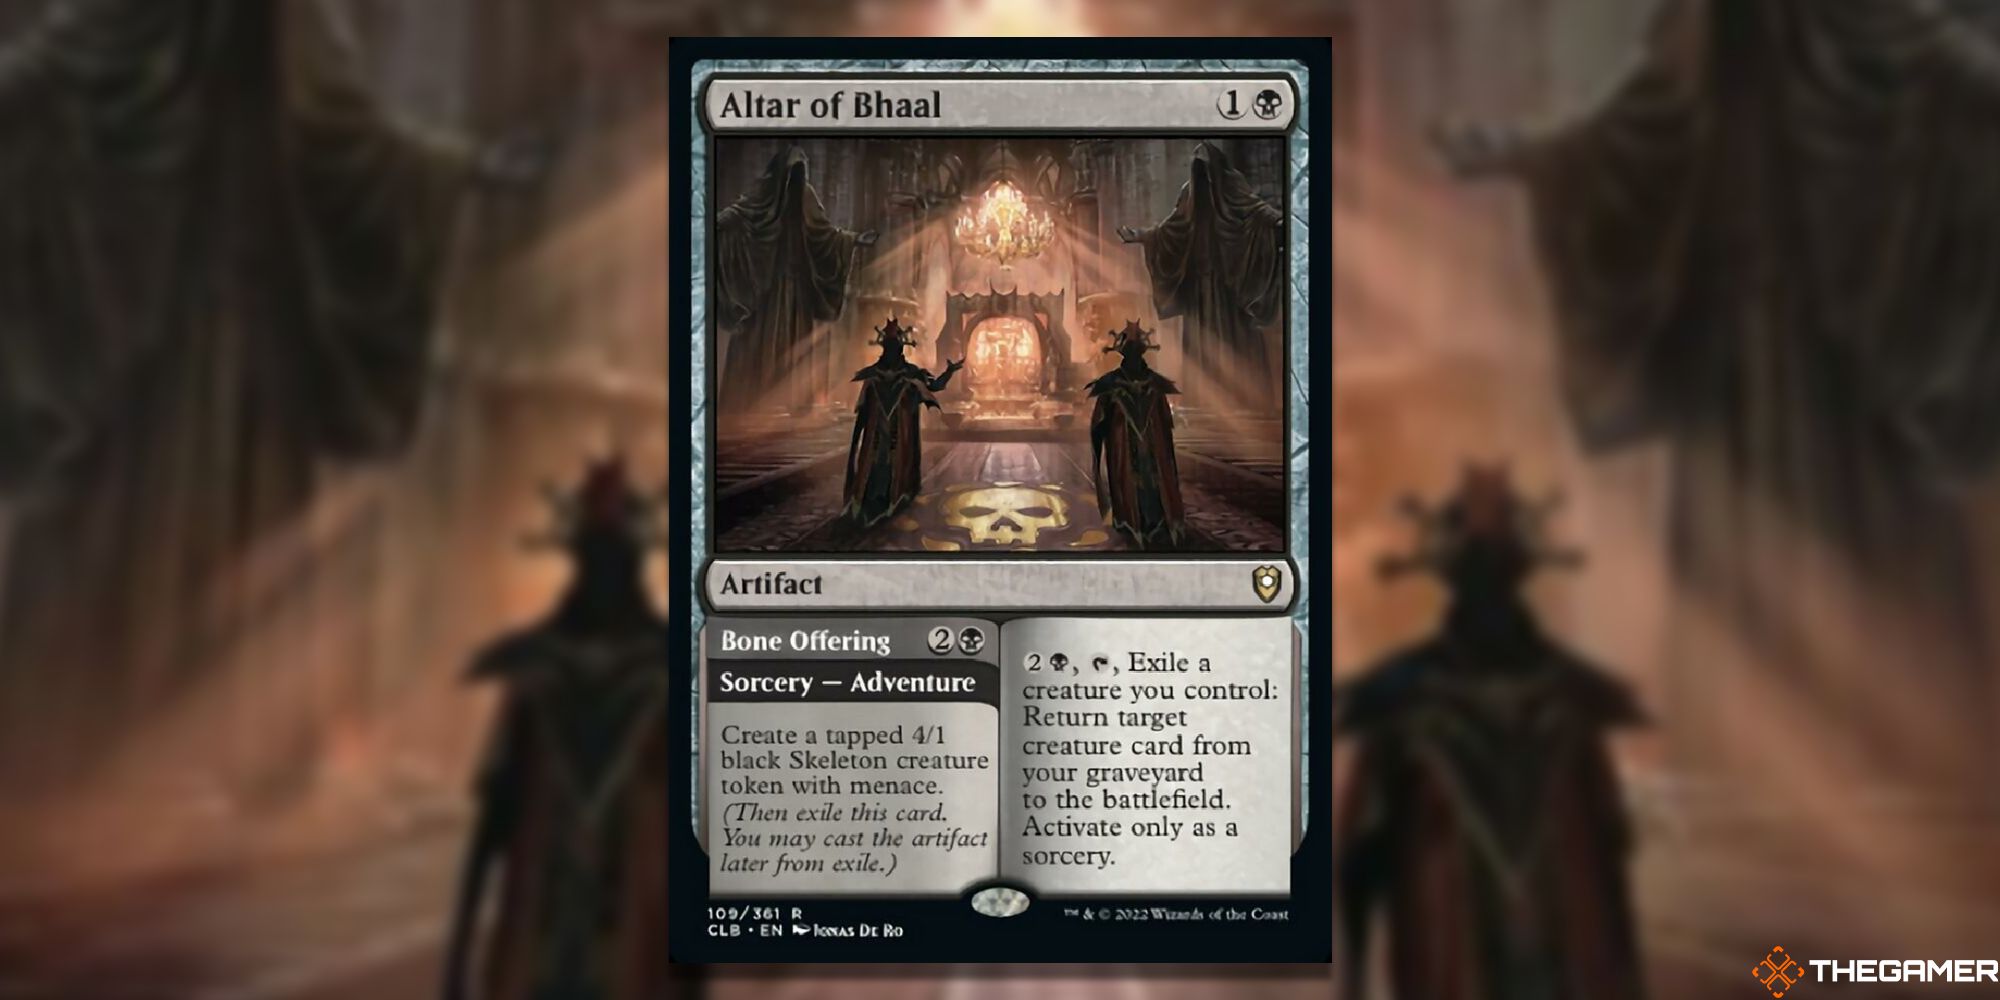 Magic: The Gathering Altar of Bhaal full card with background